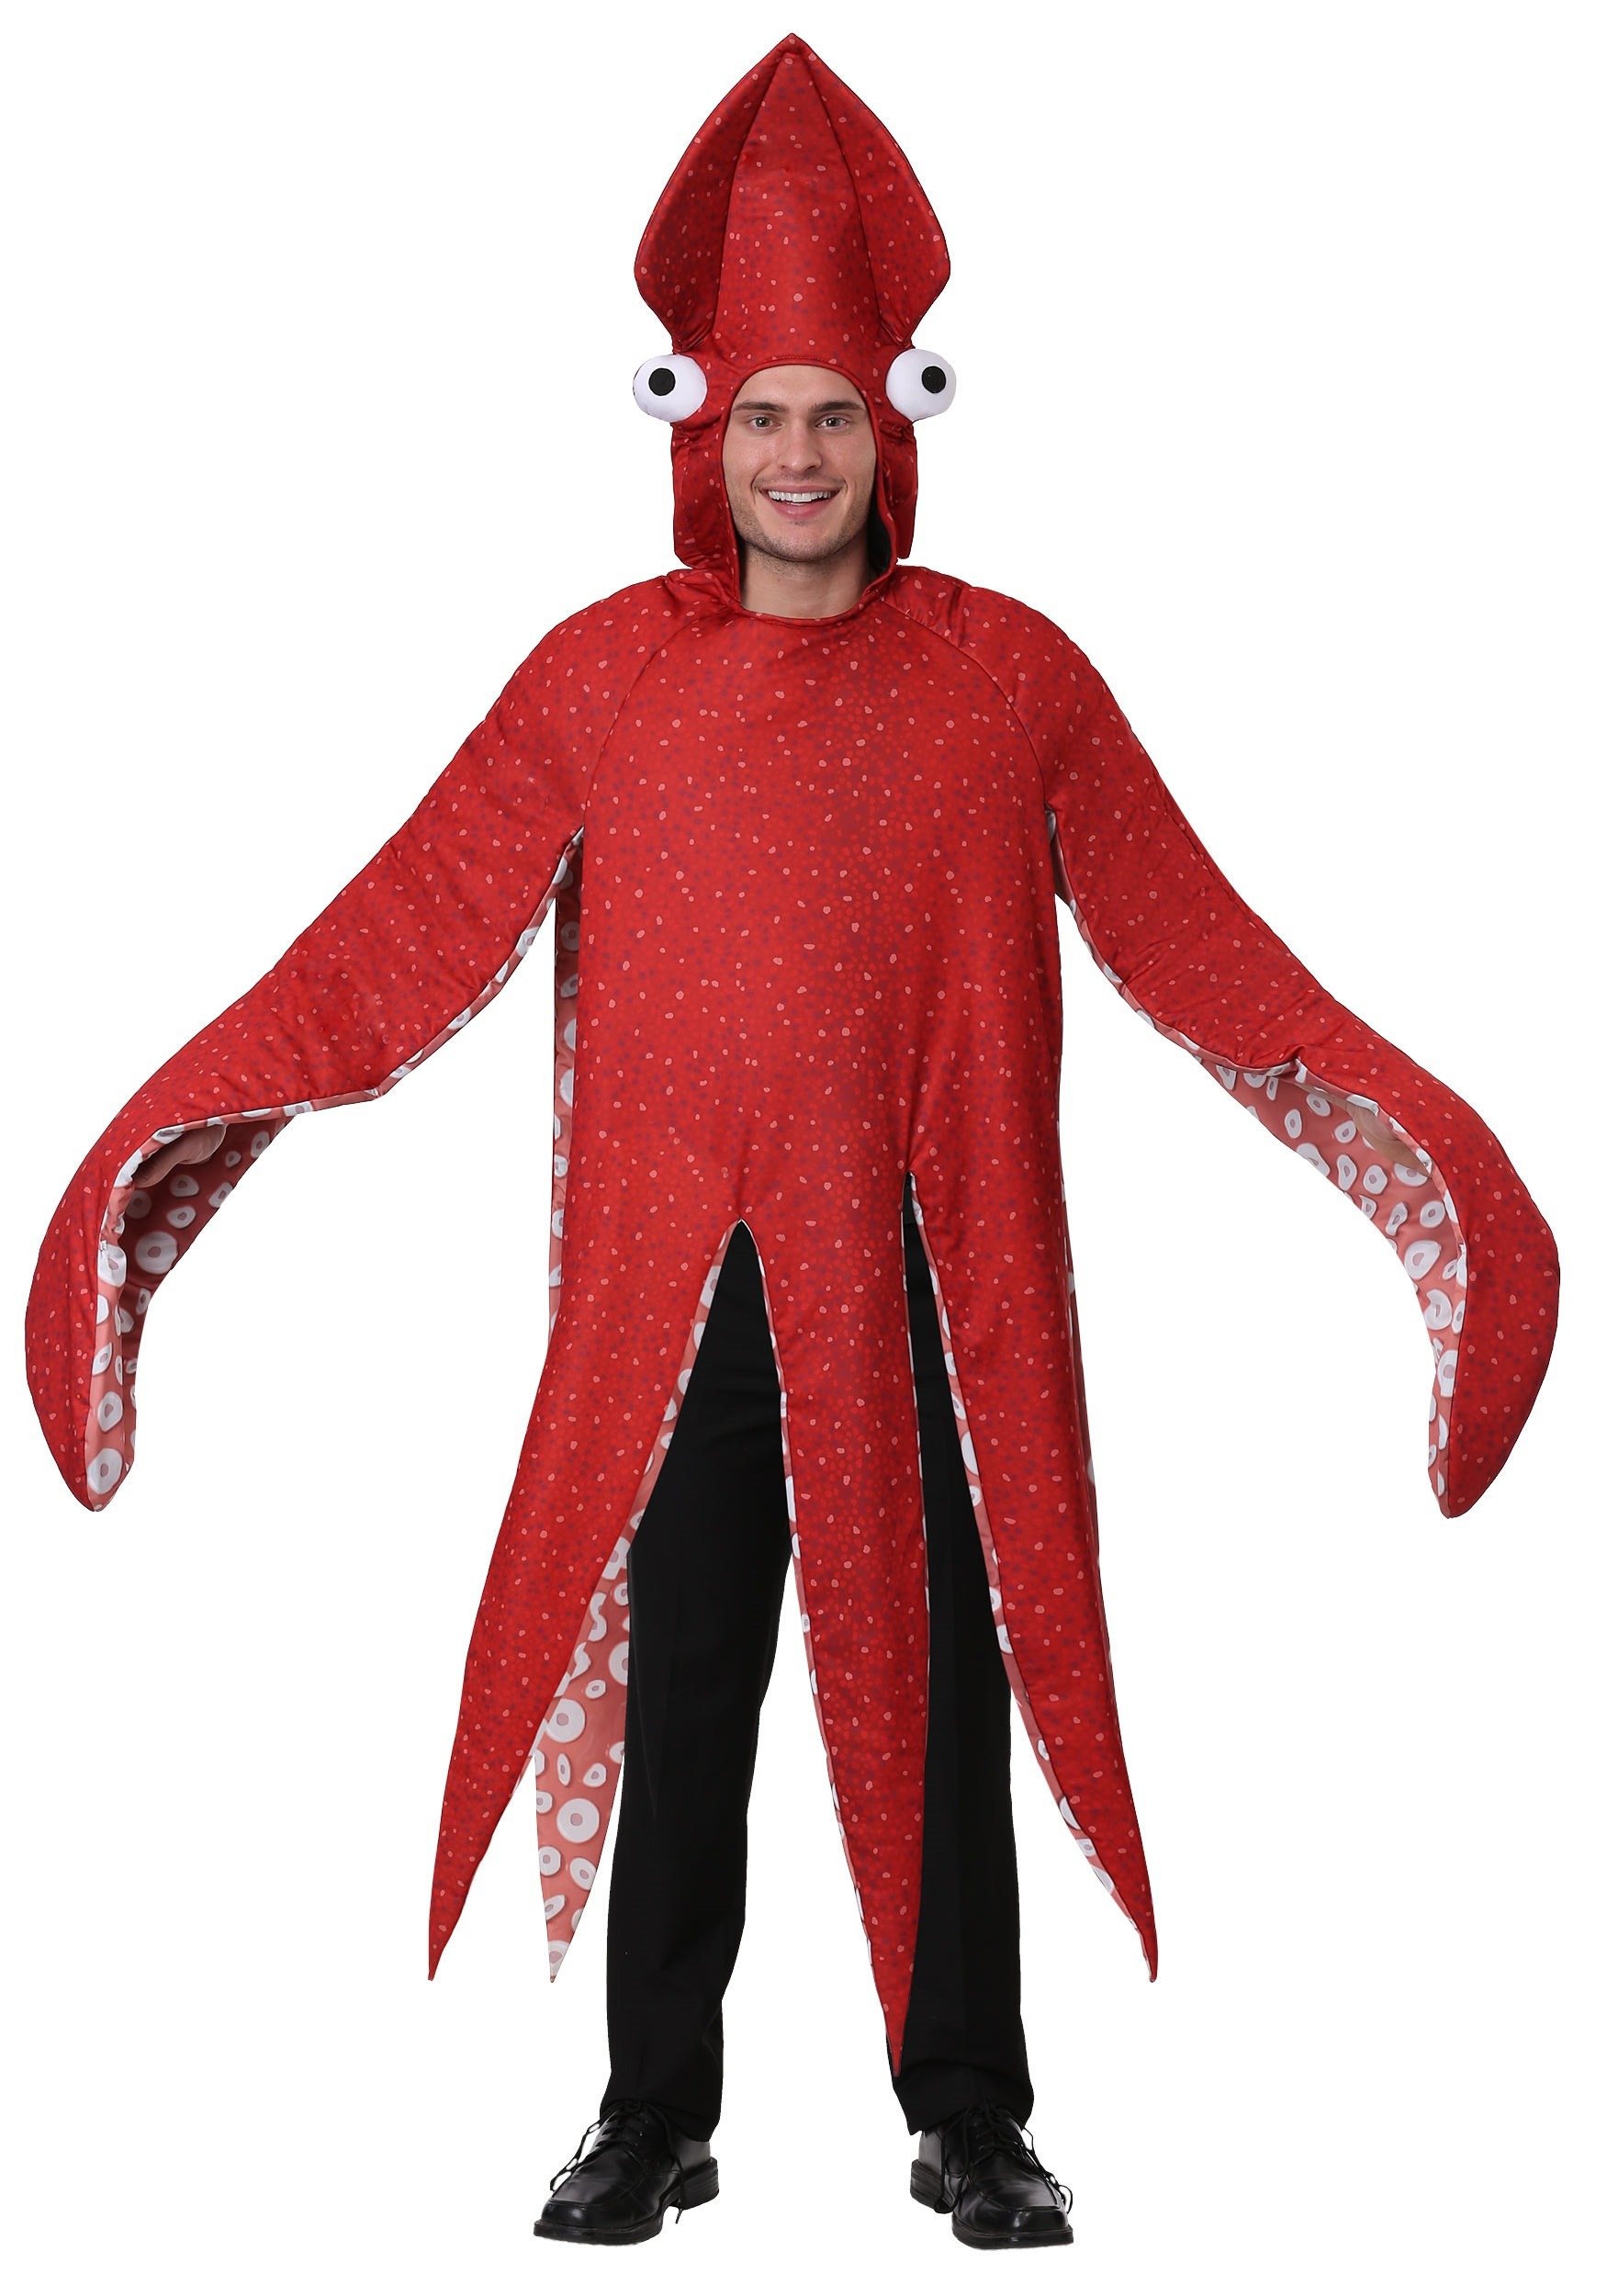 Photos - Fancy Dress FUN Costumes Squid Costume for Adults Orange/Red FUN6851AD